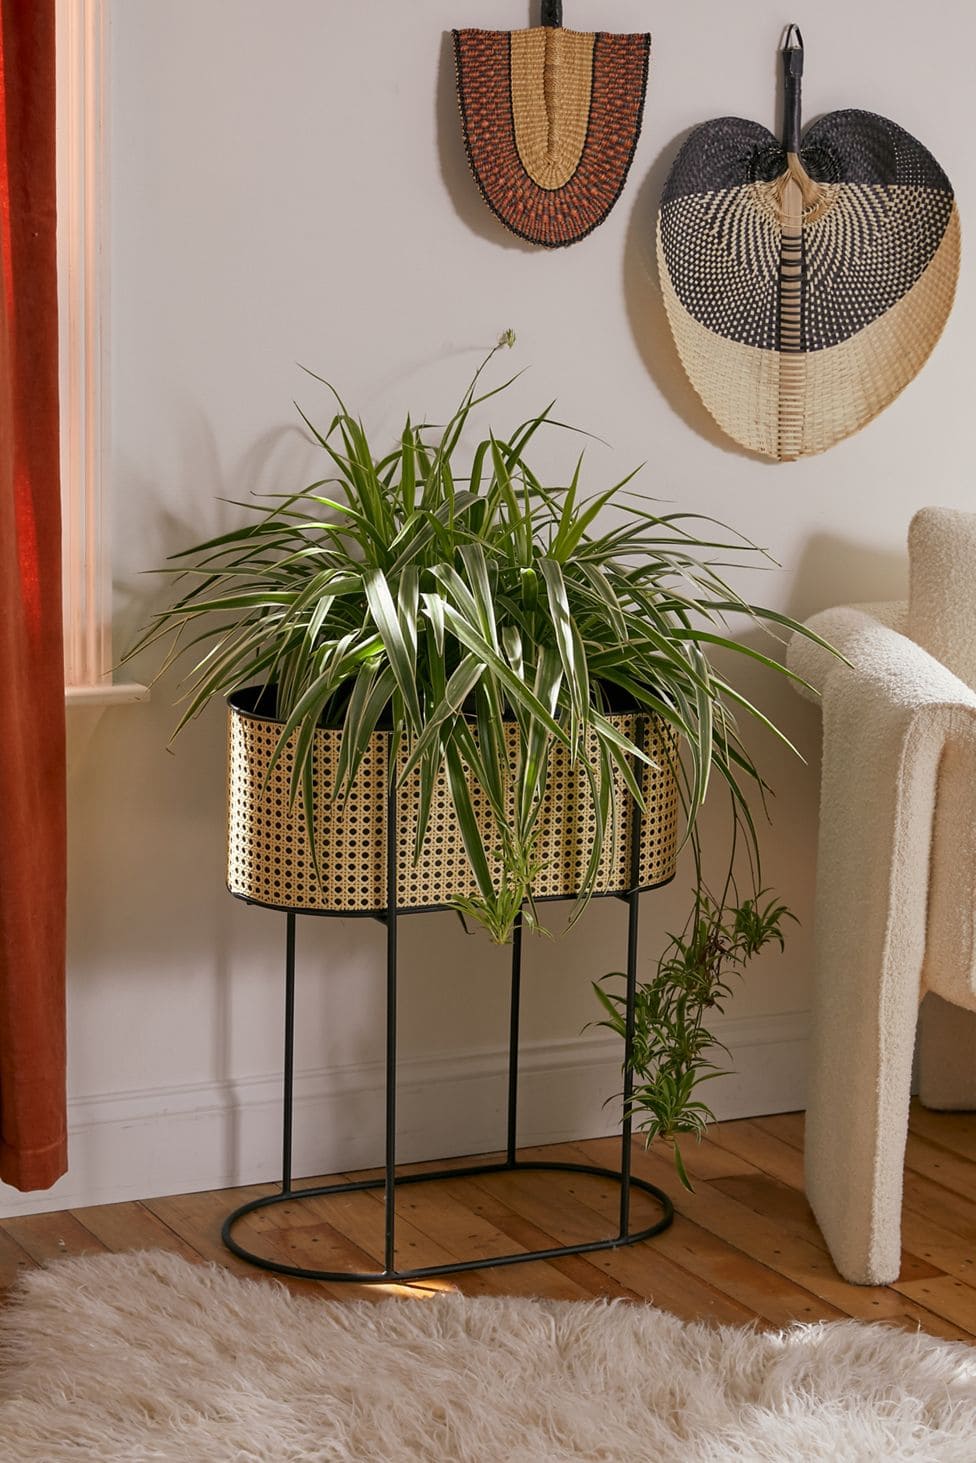 Put Large Plants in a Free Standing Plant Holder